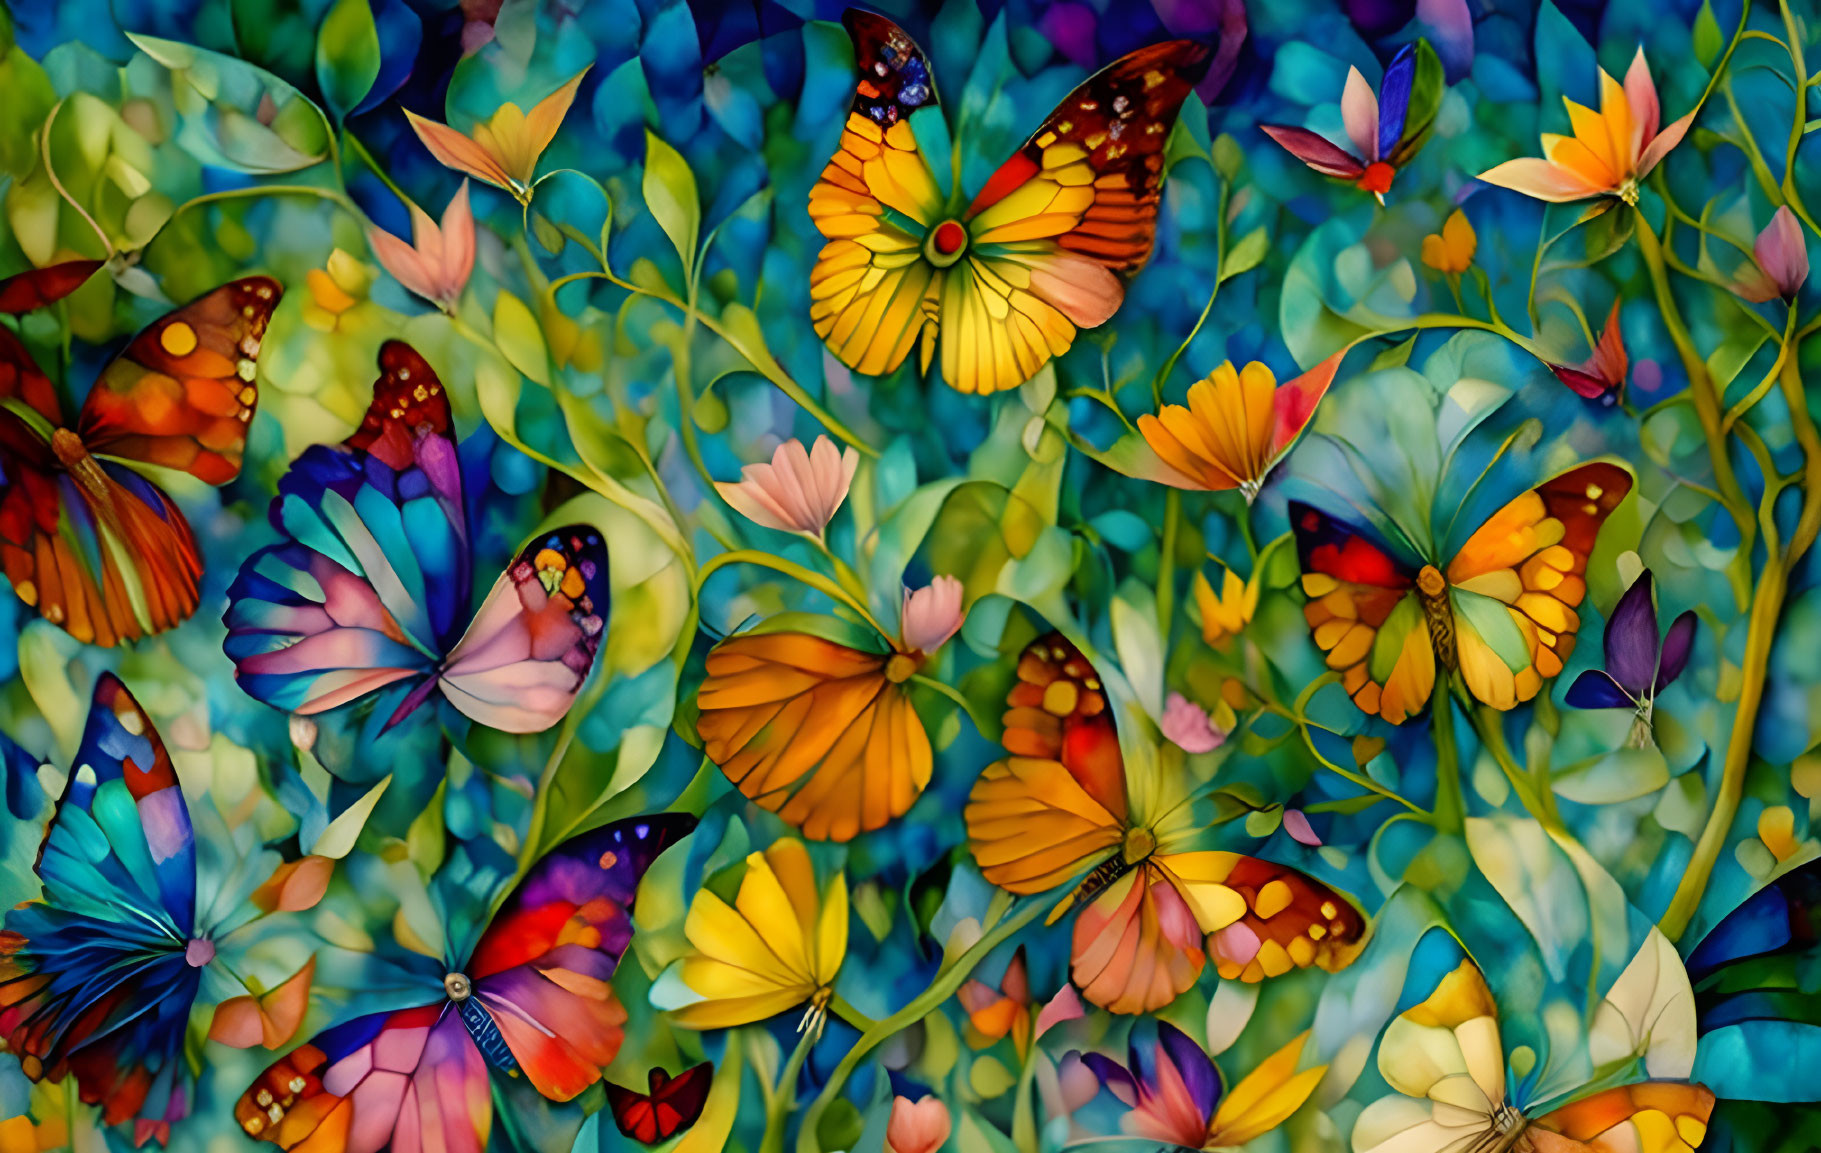 Colorful Butterflies Among Multicolored Flowers in Enchanting Garden